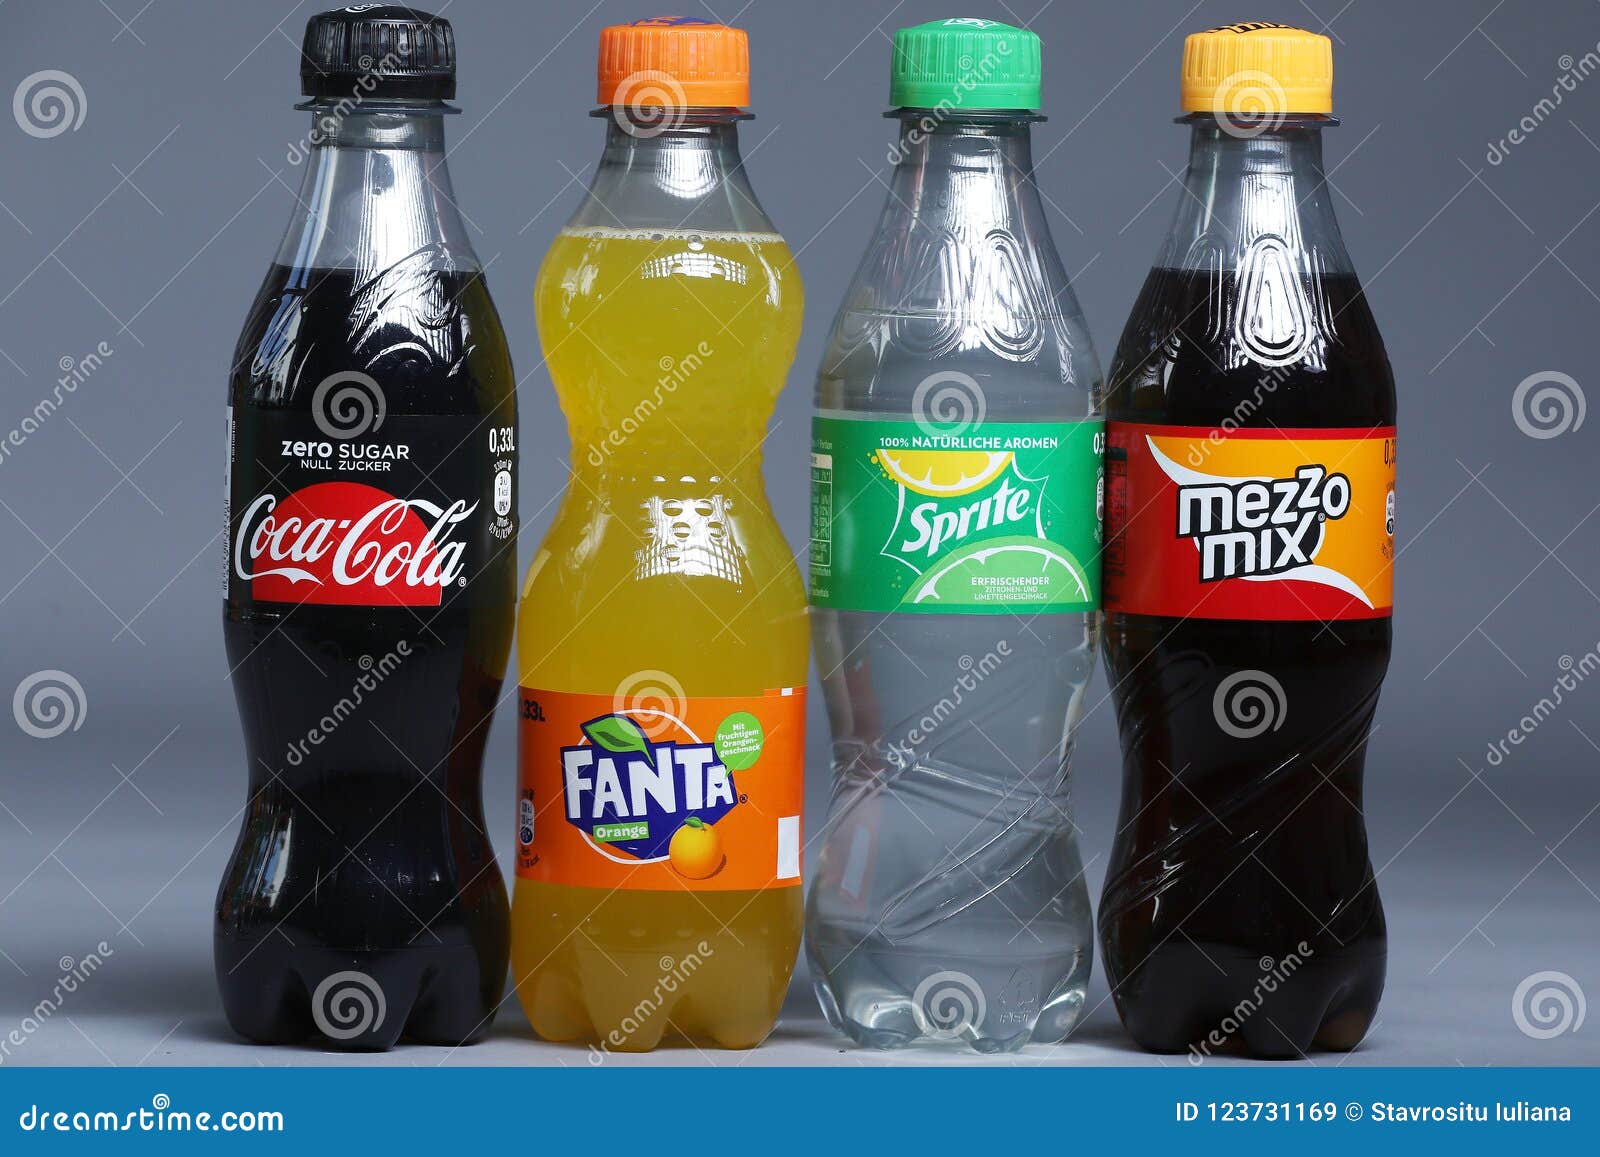 Fanta, Cola, Sprite and Mezzo Mix Bottles of Drinks Editorial Stock Image -  Image of drinking, drinks: 123731169